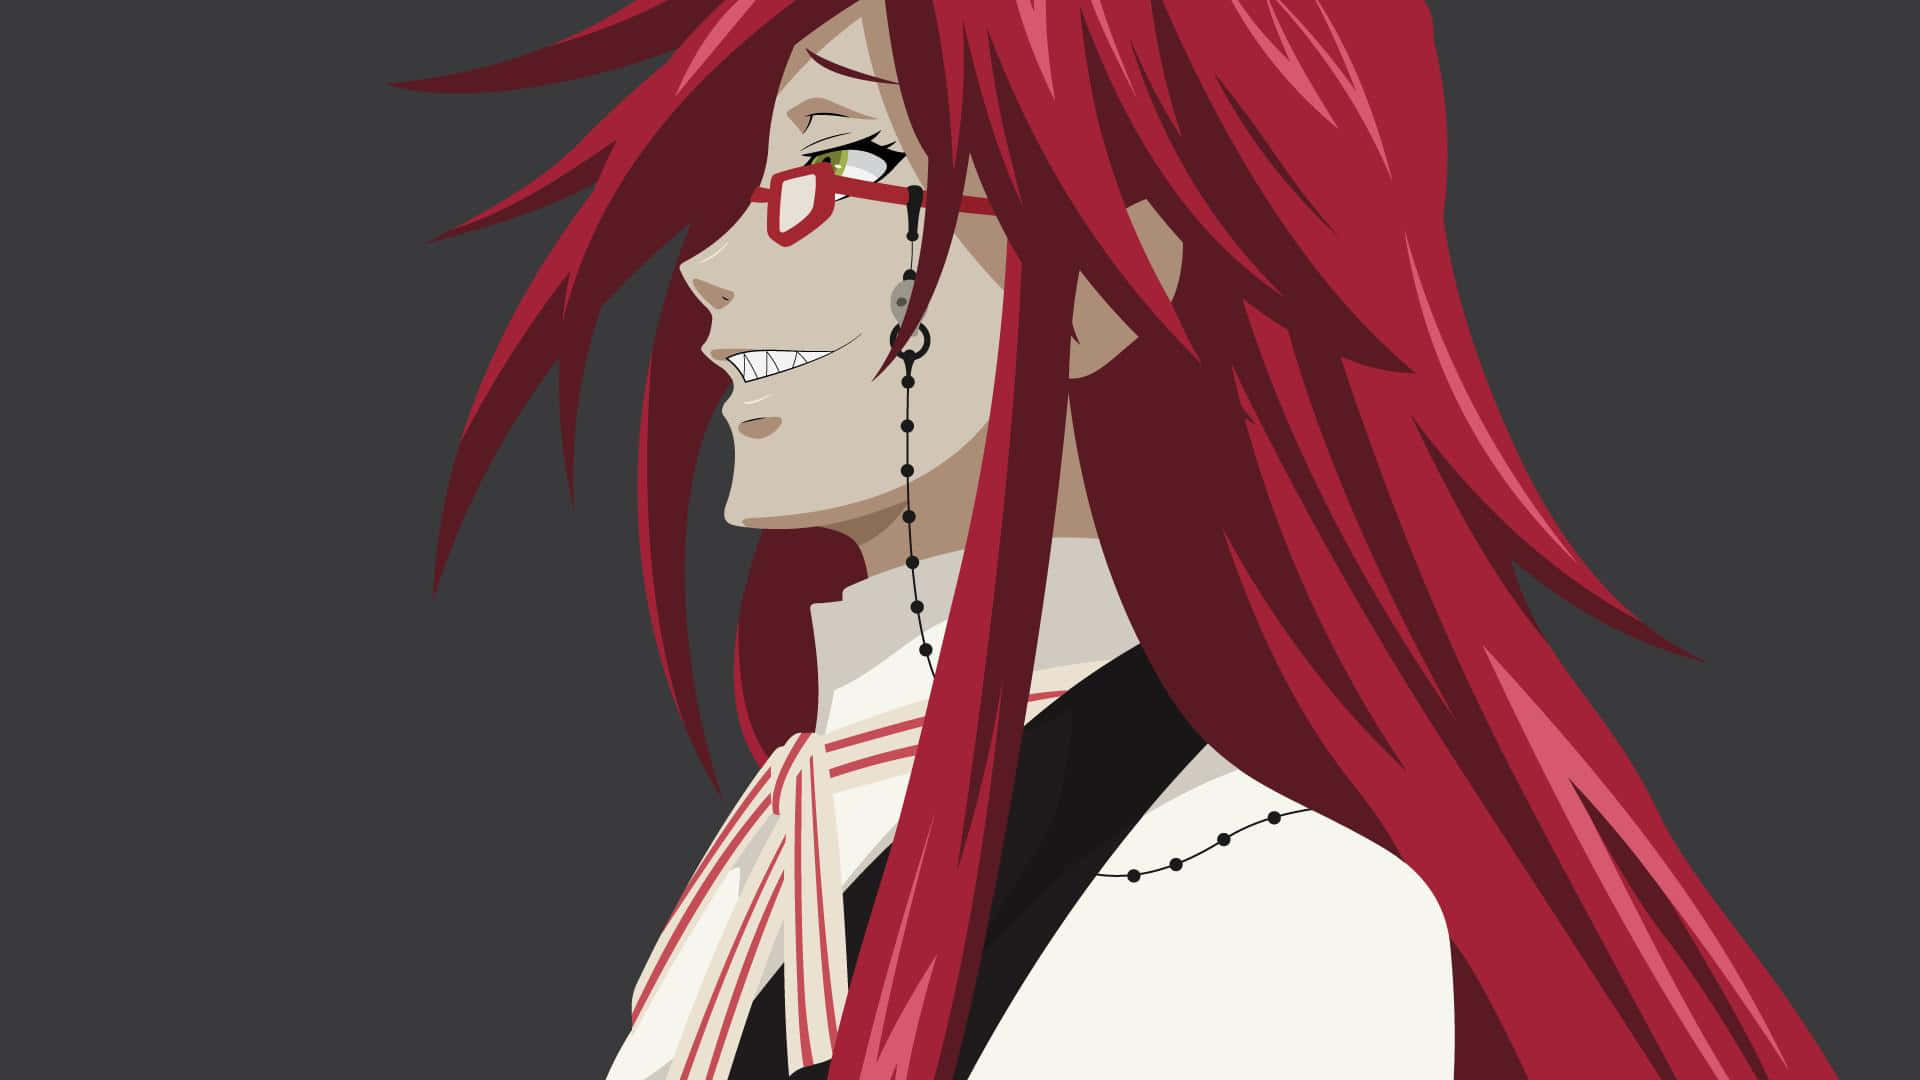 The enigmatic Grell Sutcliff in a vibrant and captivating portrait Wallpaper